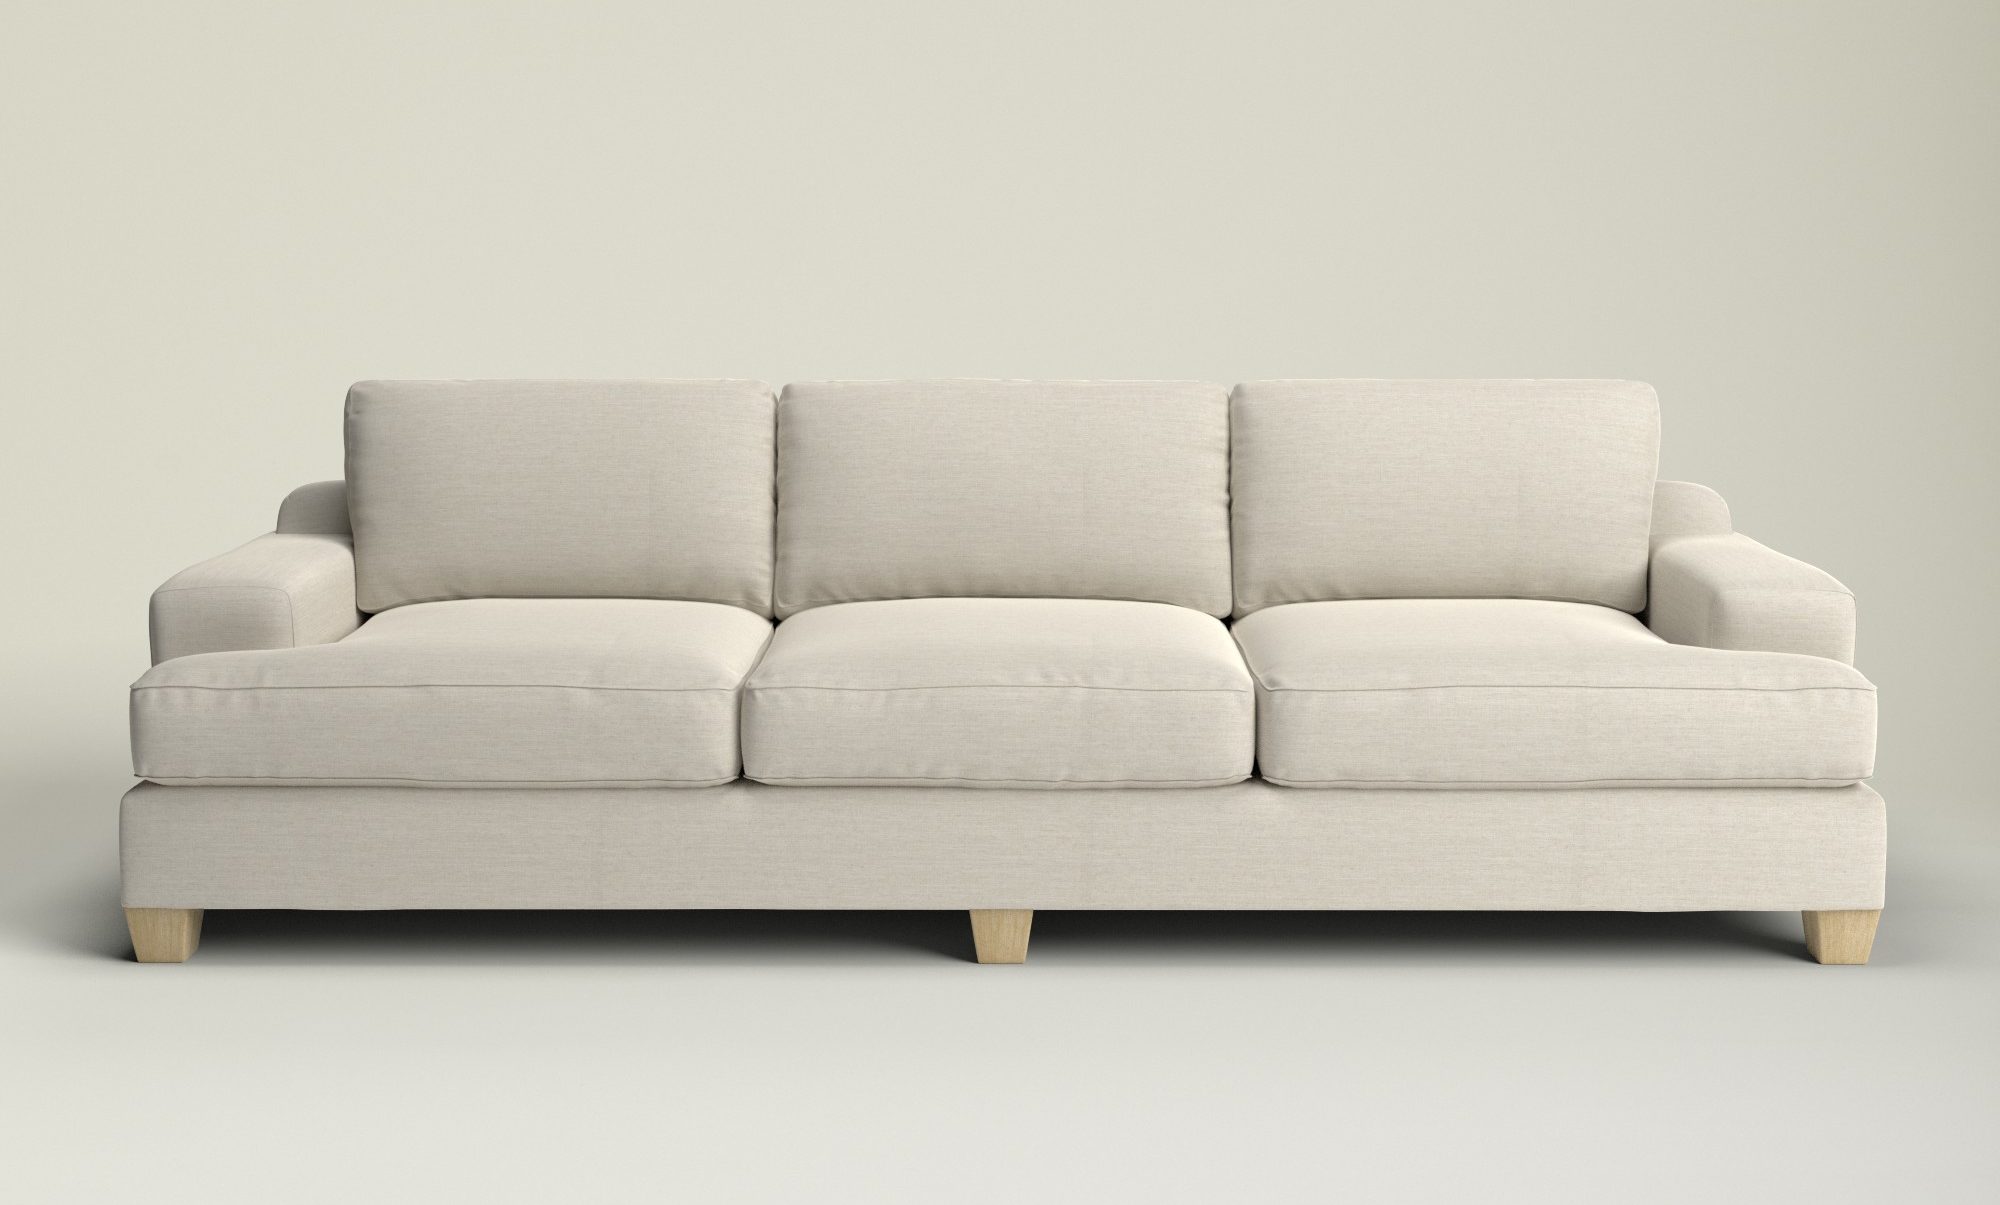 Mantle Burke sofaBest Sofa Sectional Reviews.